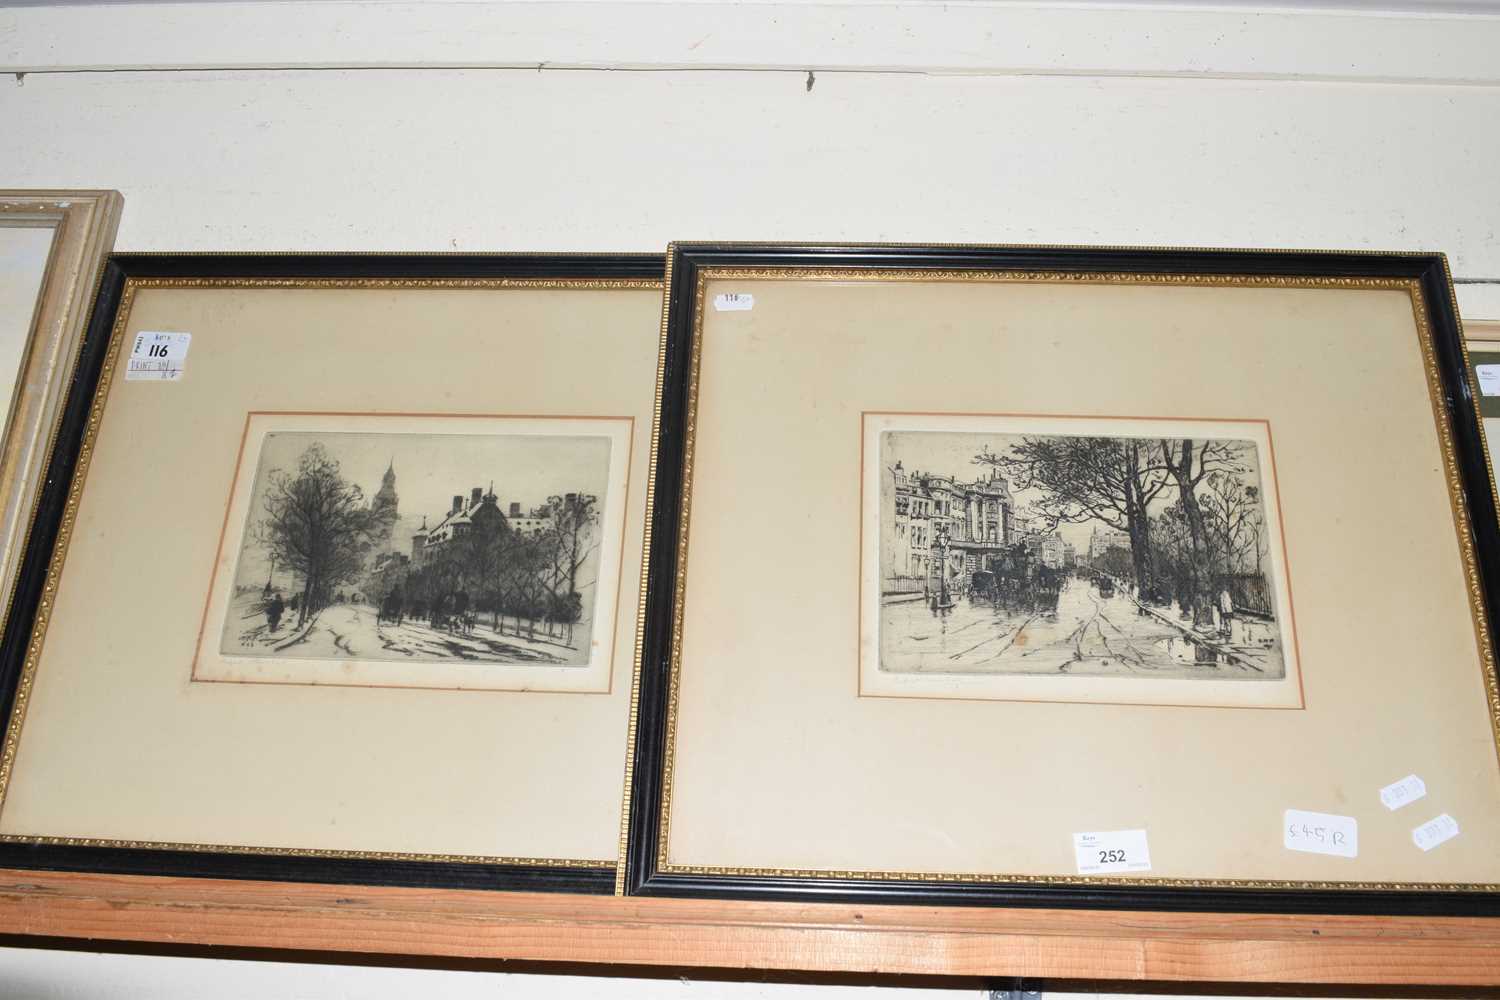 Herbert Marshall - Study of a London street scene (thought to be Embankment), framed and glazed